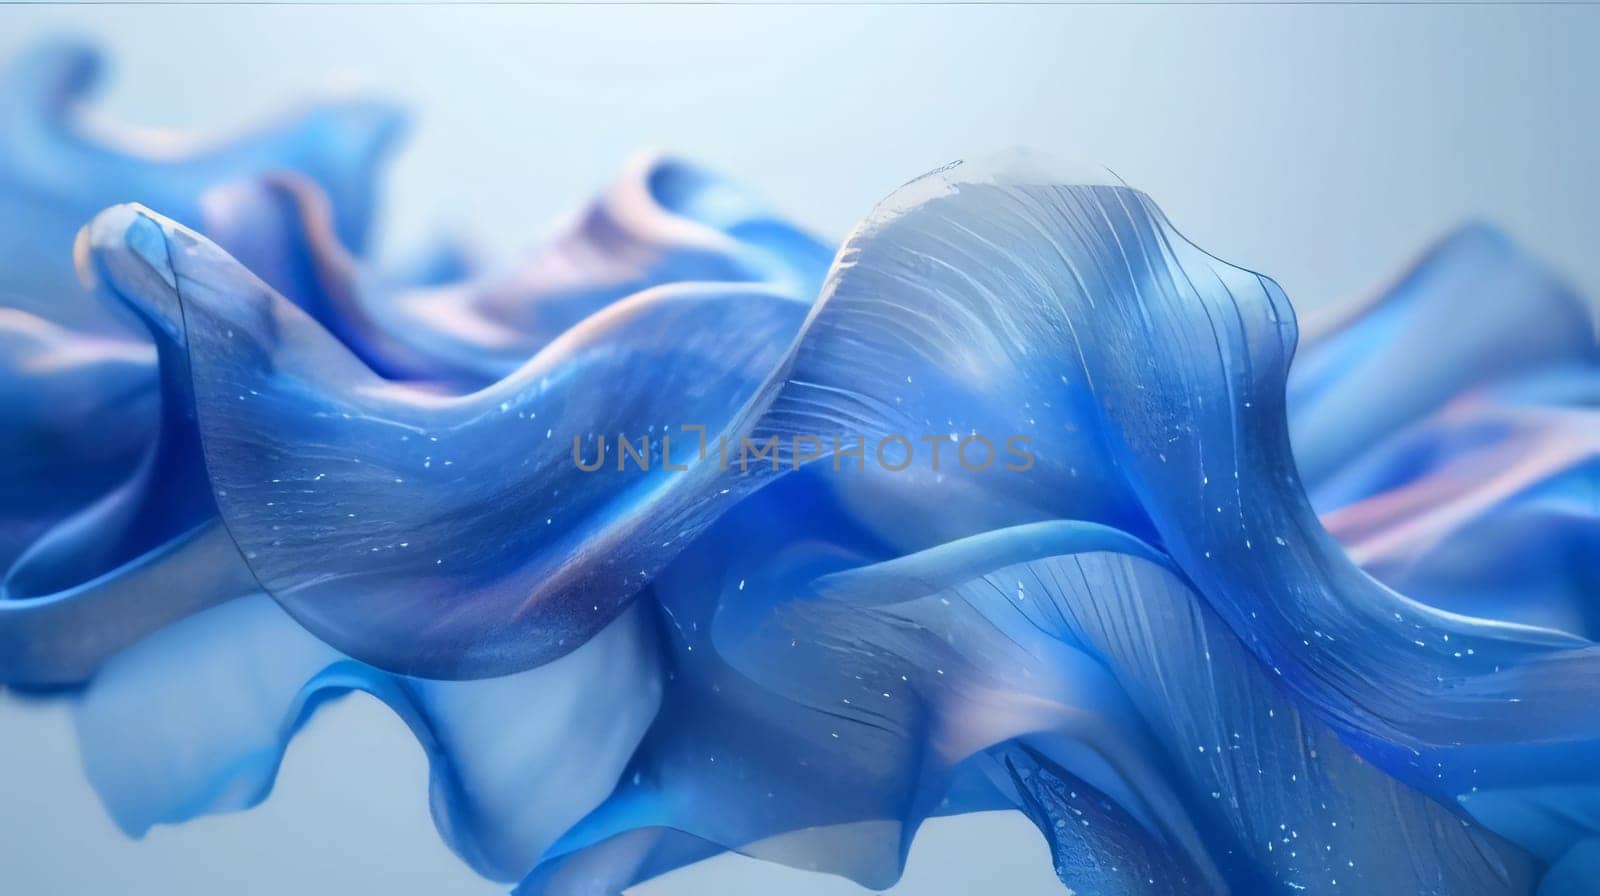 Abstract background design: 3d render, abstract background with blue and white wavy fabric